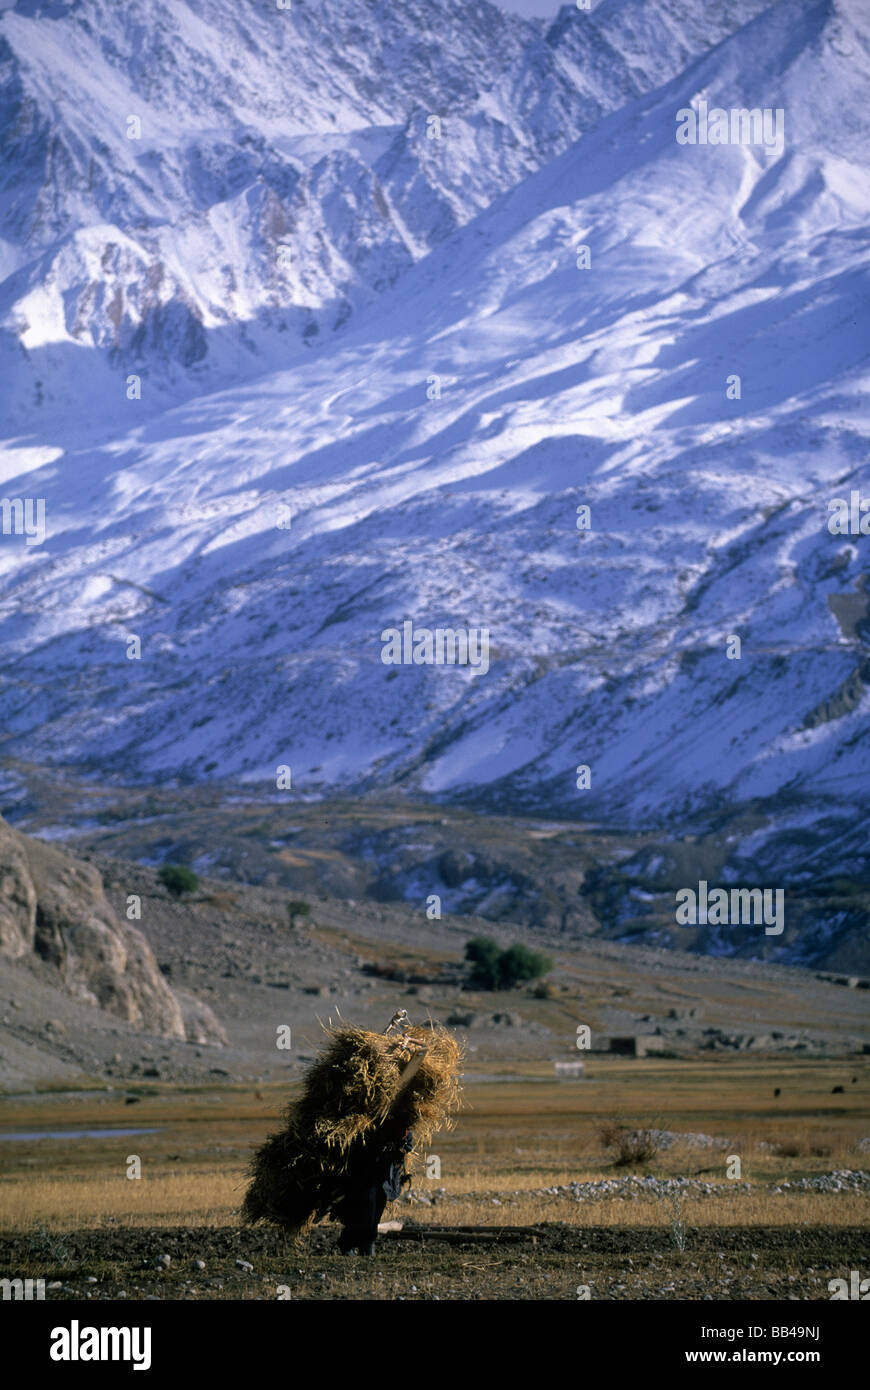 A man carries a load of hay outside of the village of Gaz Khan and below snow covered peaks in the Wakhan Corridor. Stock Photo